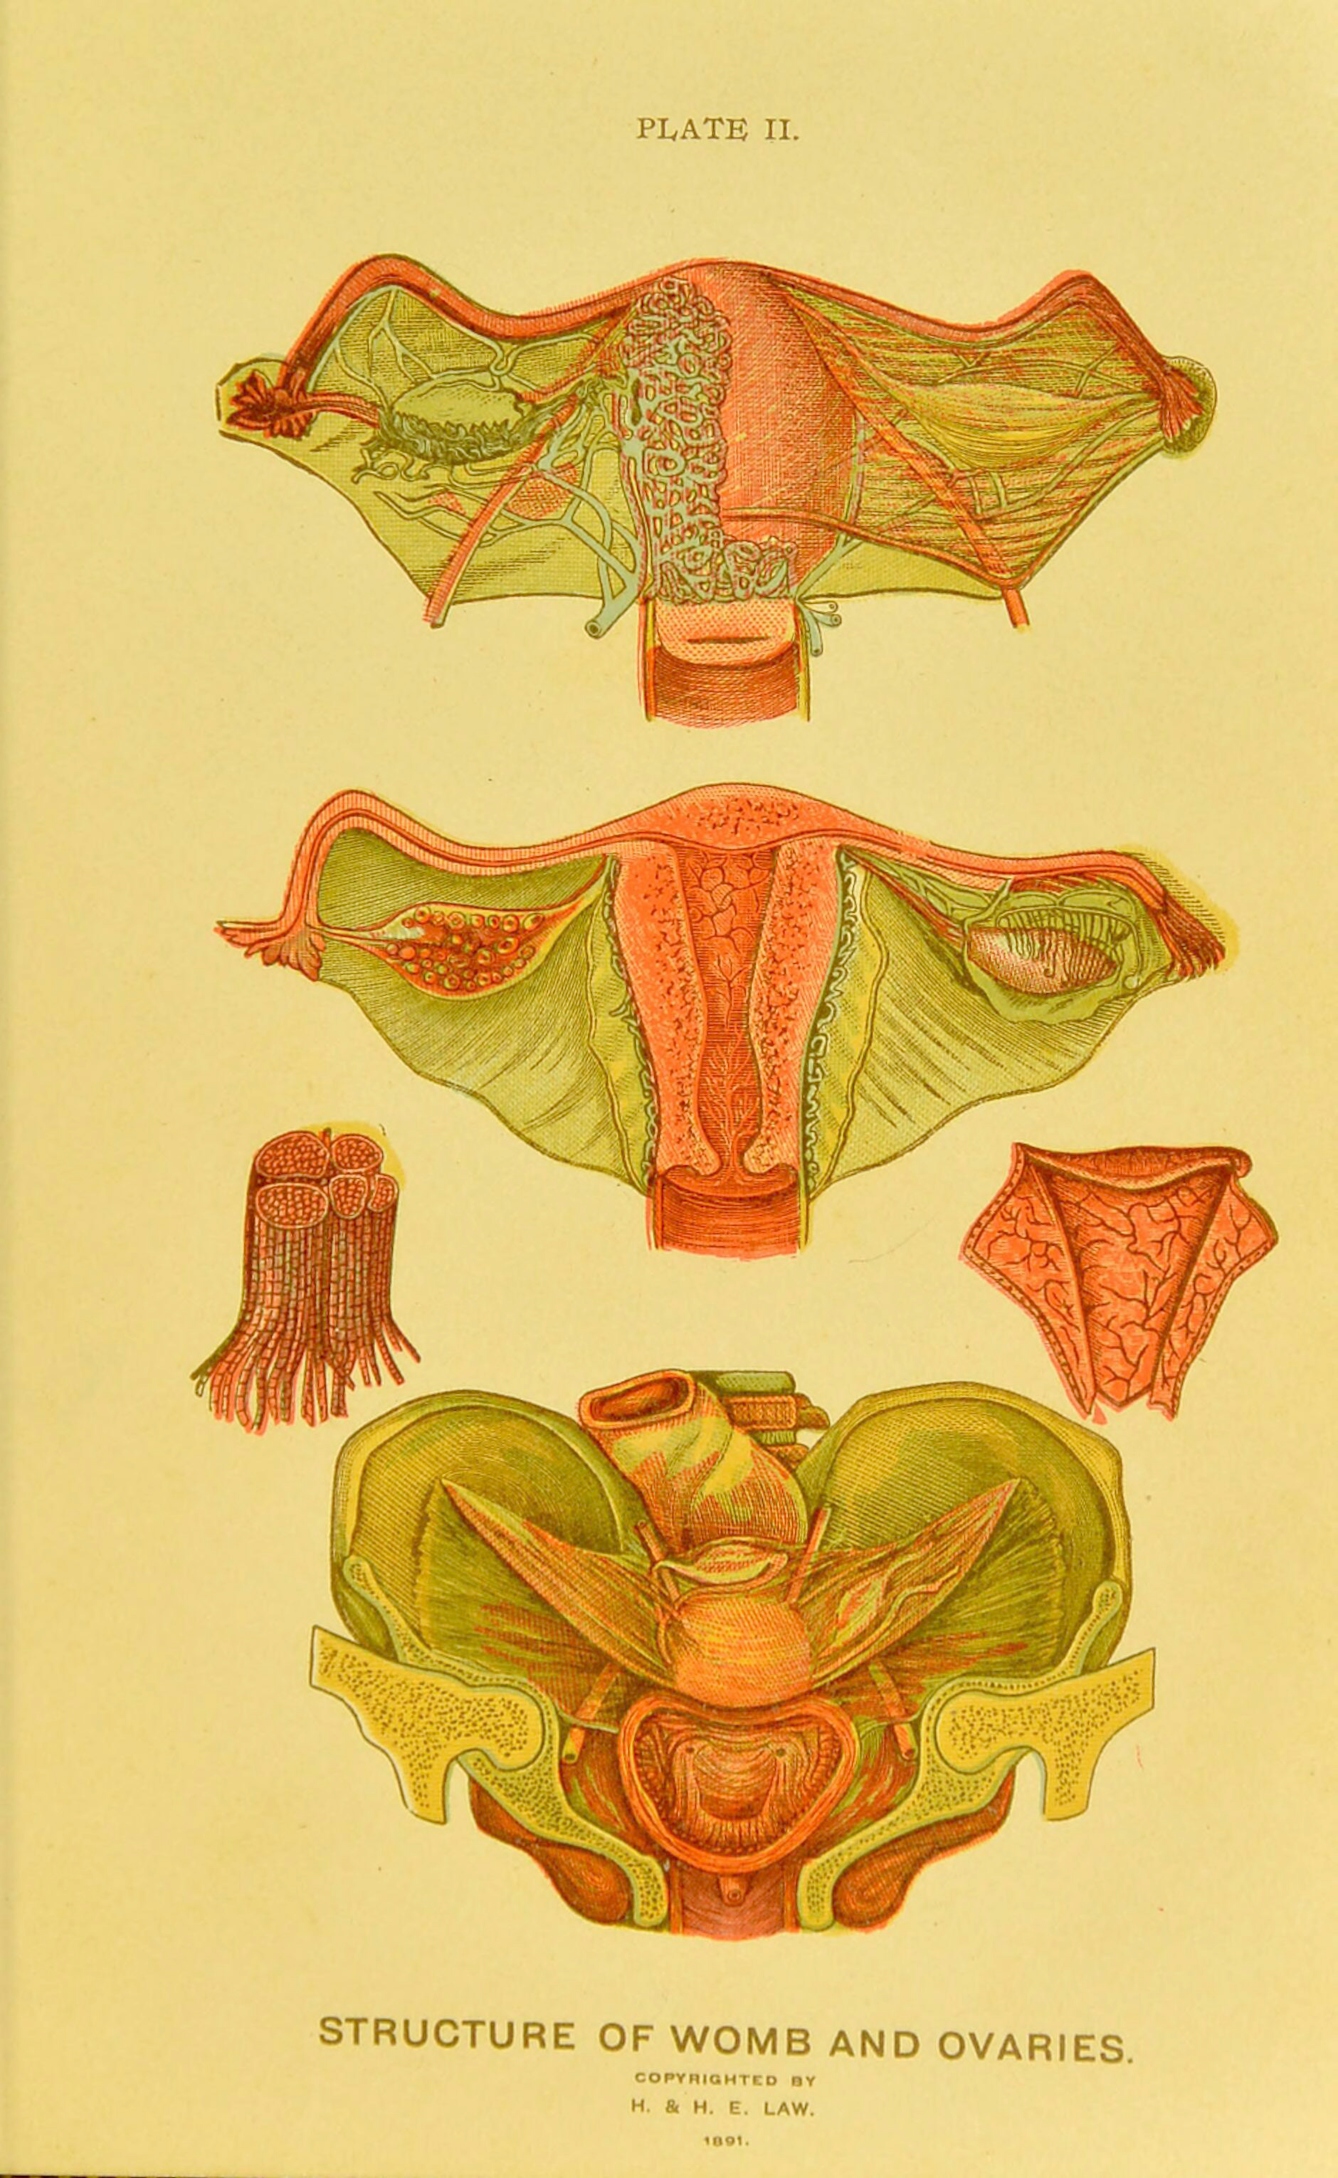 Anatomical plate showing structure of the womb and ovaries